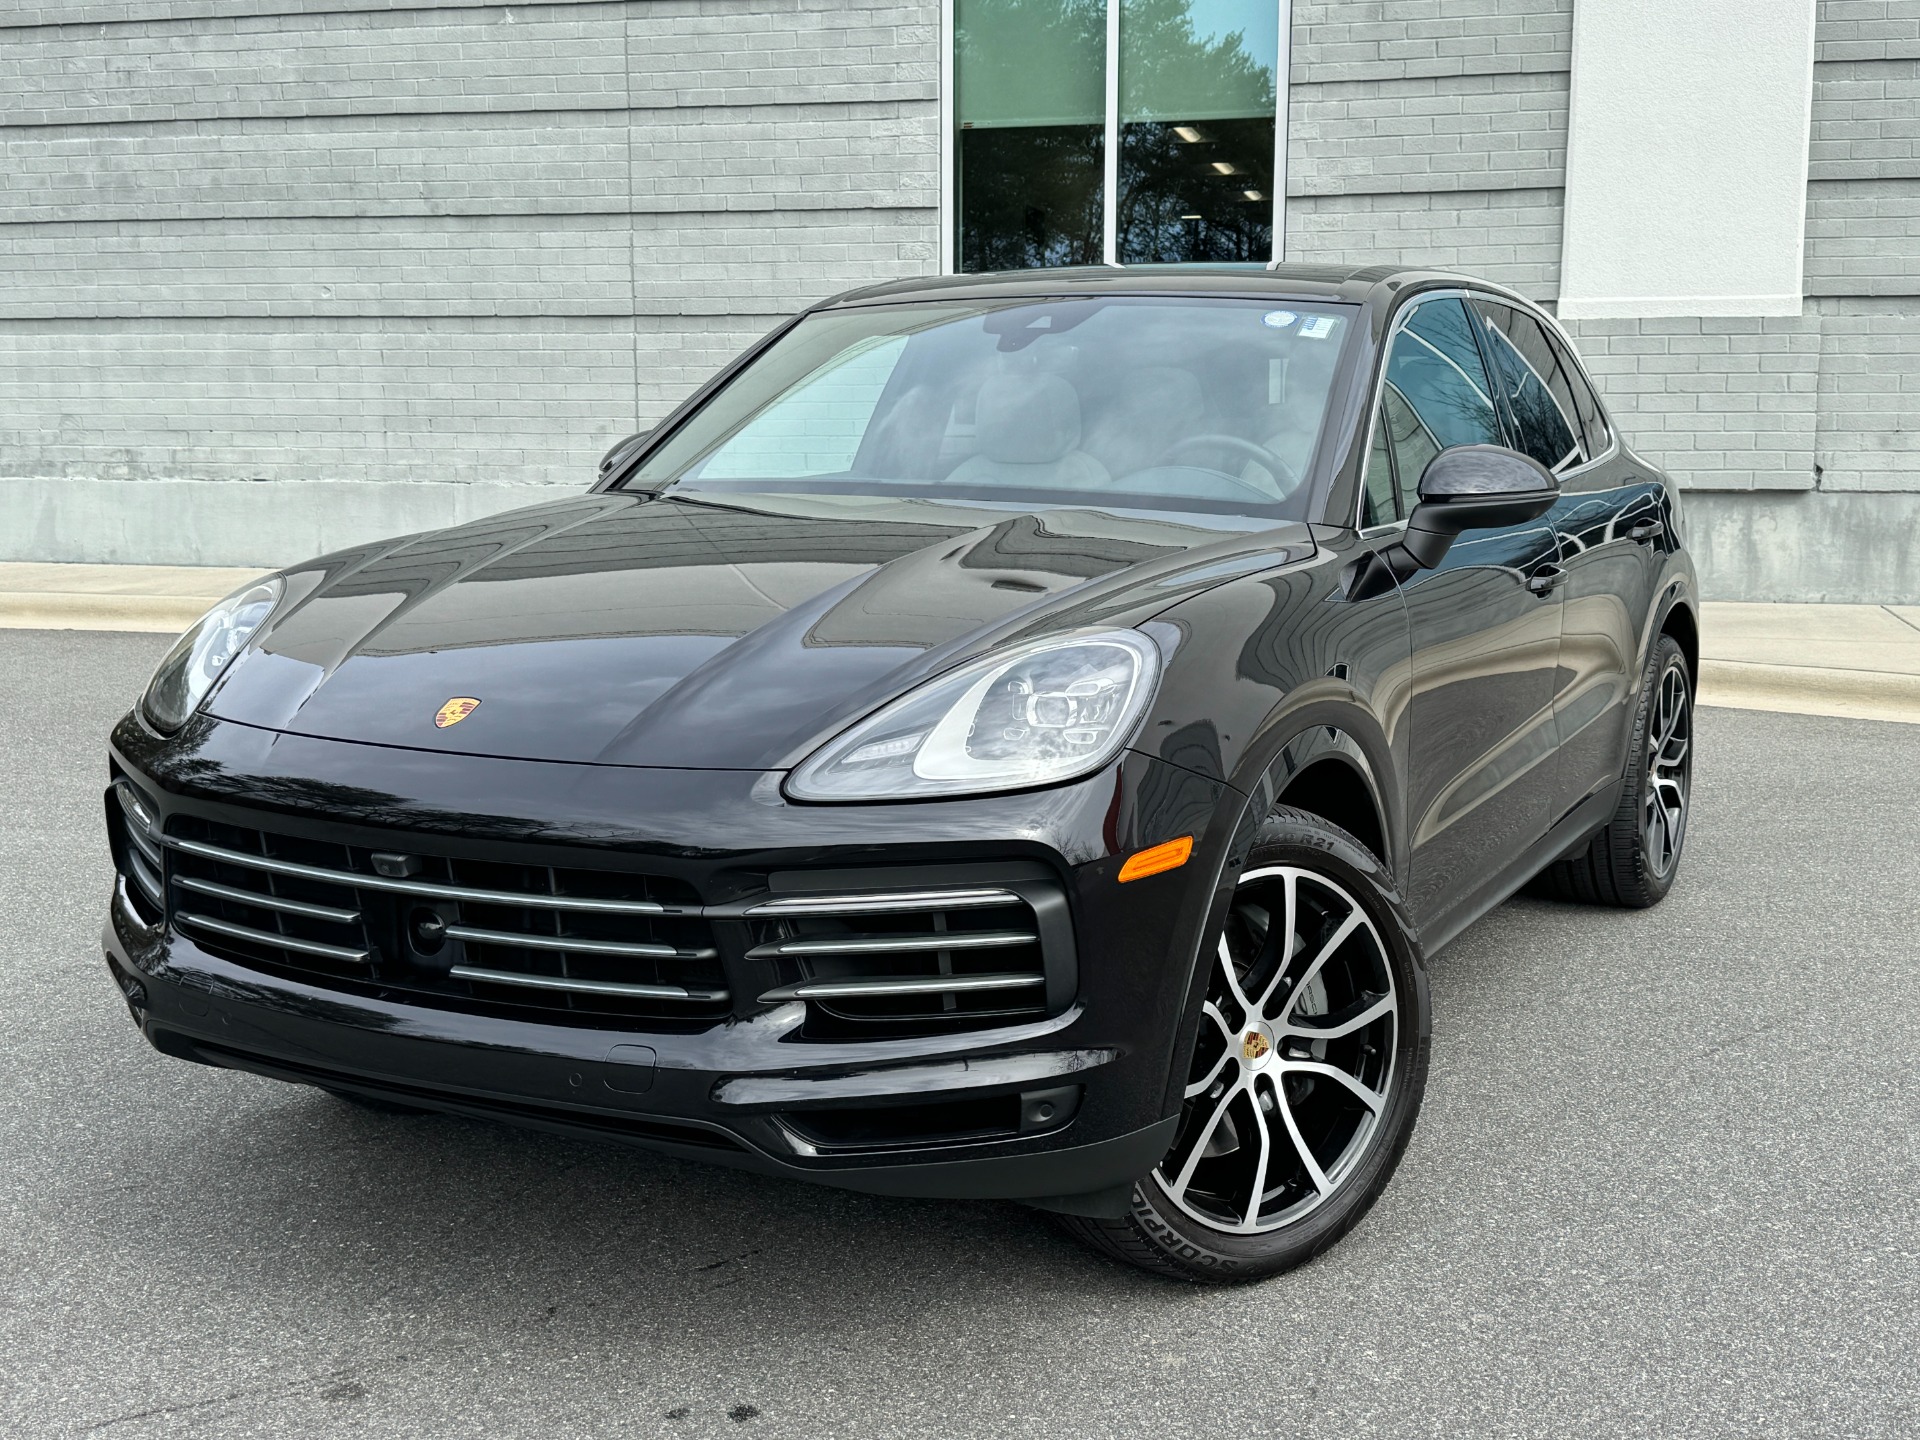 Used 2020 Porsche Cayenne S for sale $59,995 at Formula Imports in Charlotte NC 28227 1